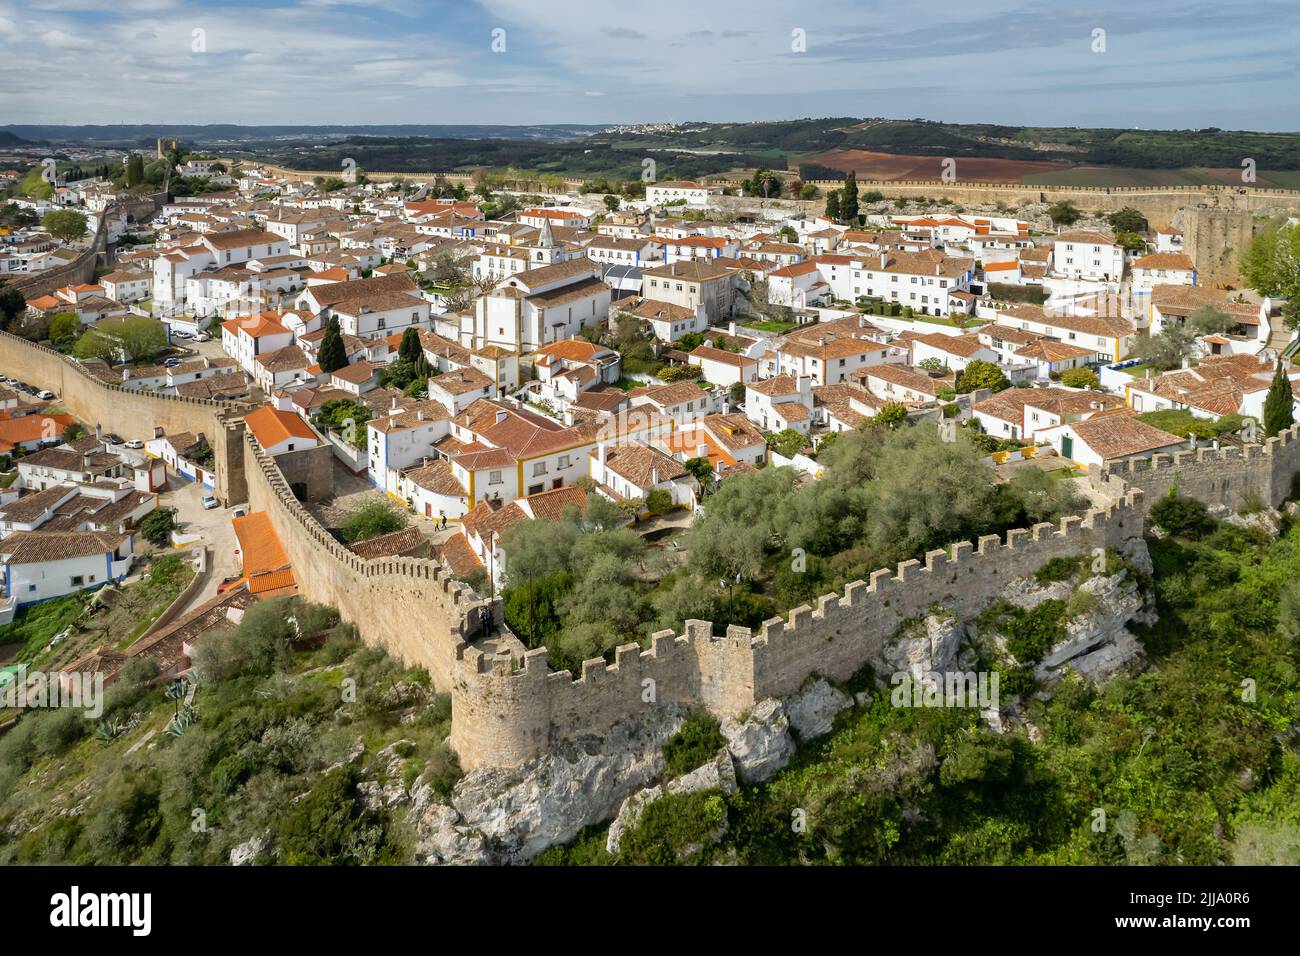 Aerial view of the historic town Obidos, near Peniche, Portugal. Stock Photo